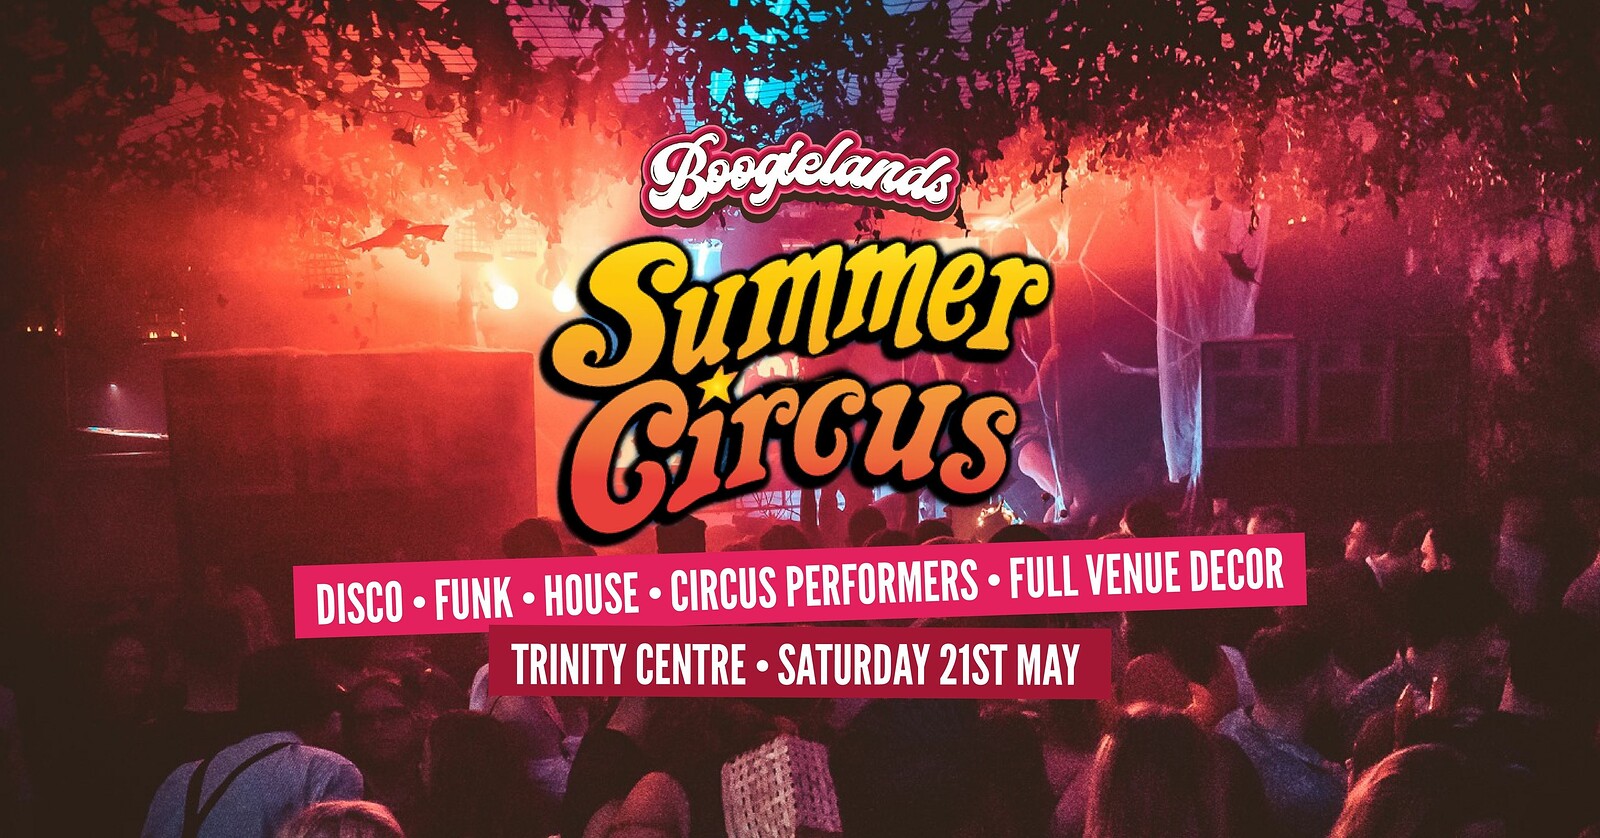 Boogielands Summer Circus at The Trinity Centre